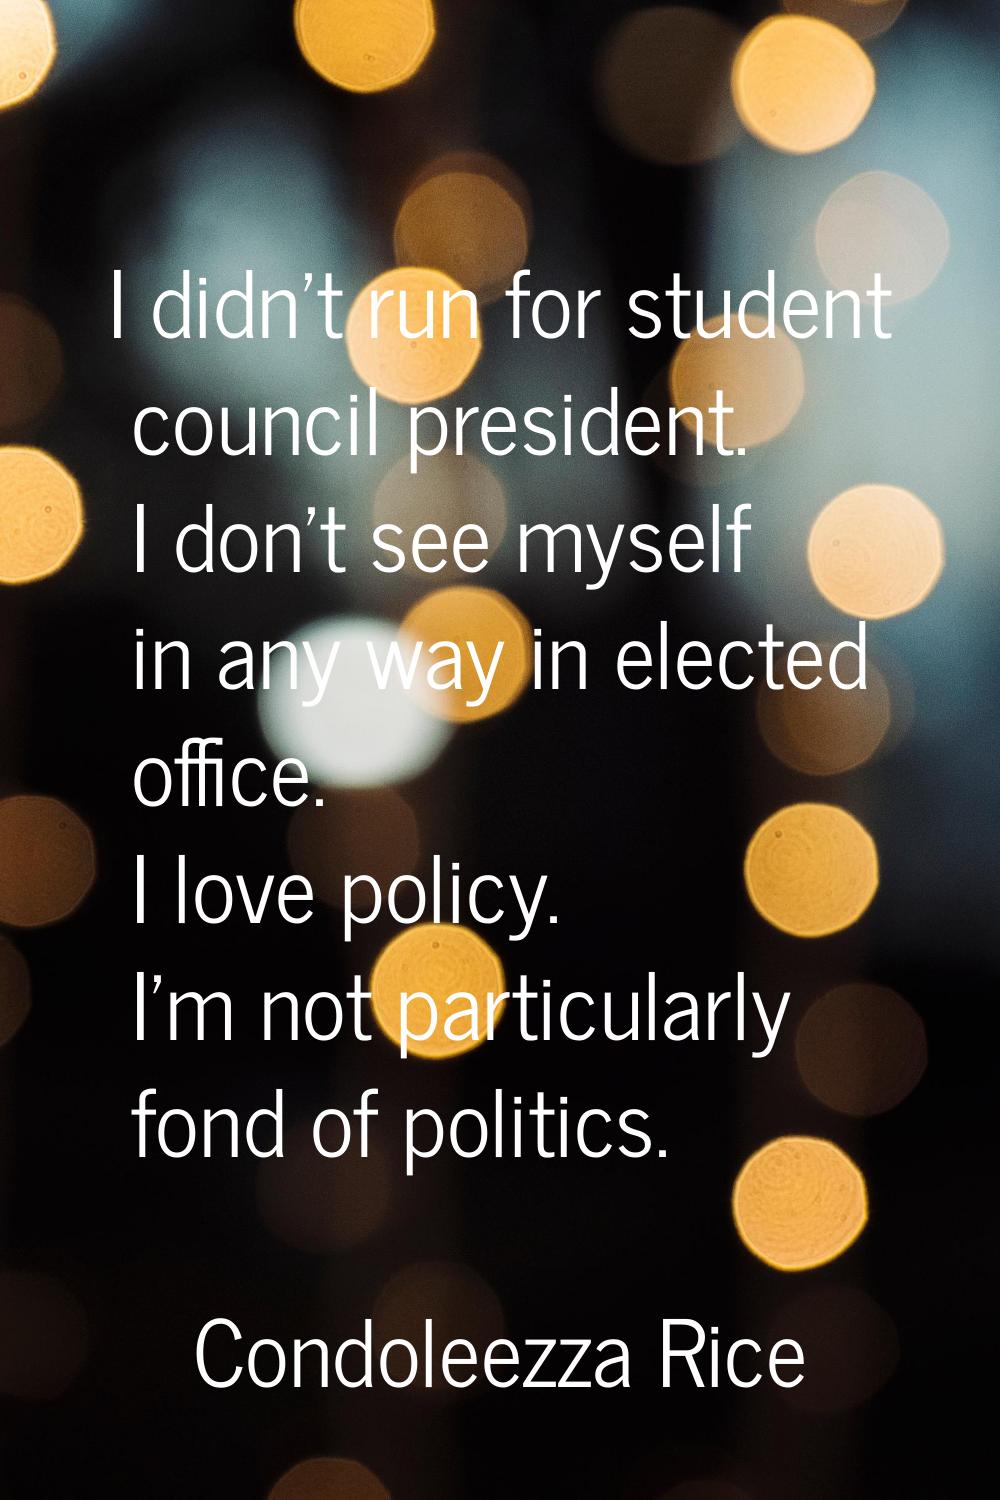 I didn't run for student council president. I don't see myself in any way in elected office. I love